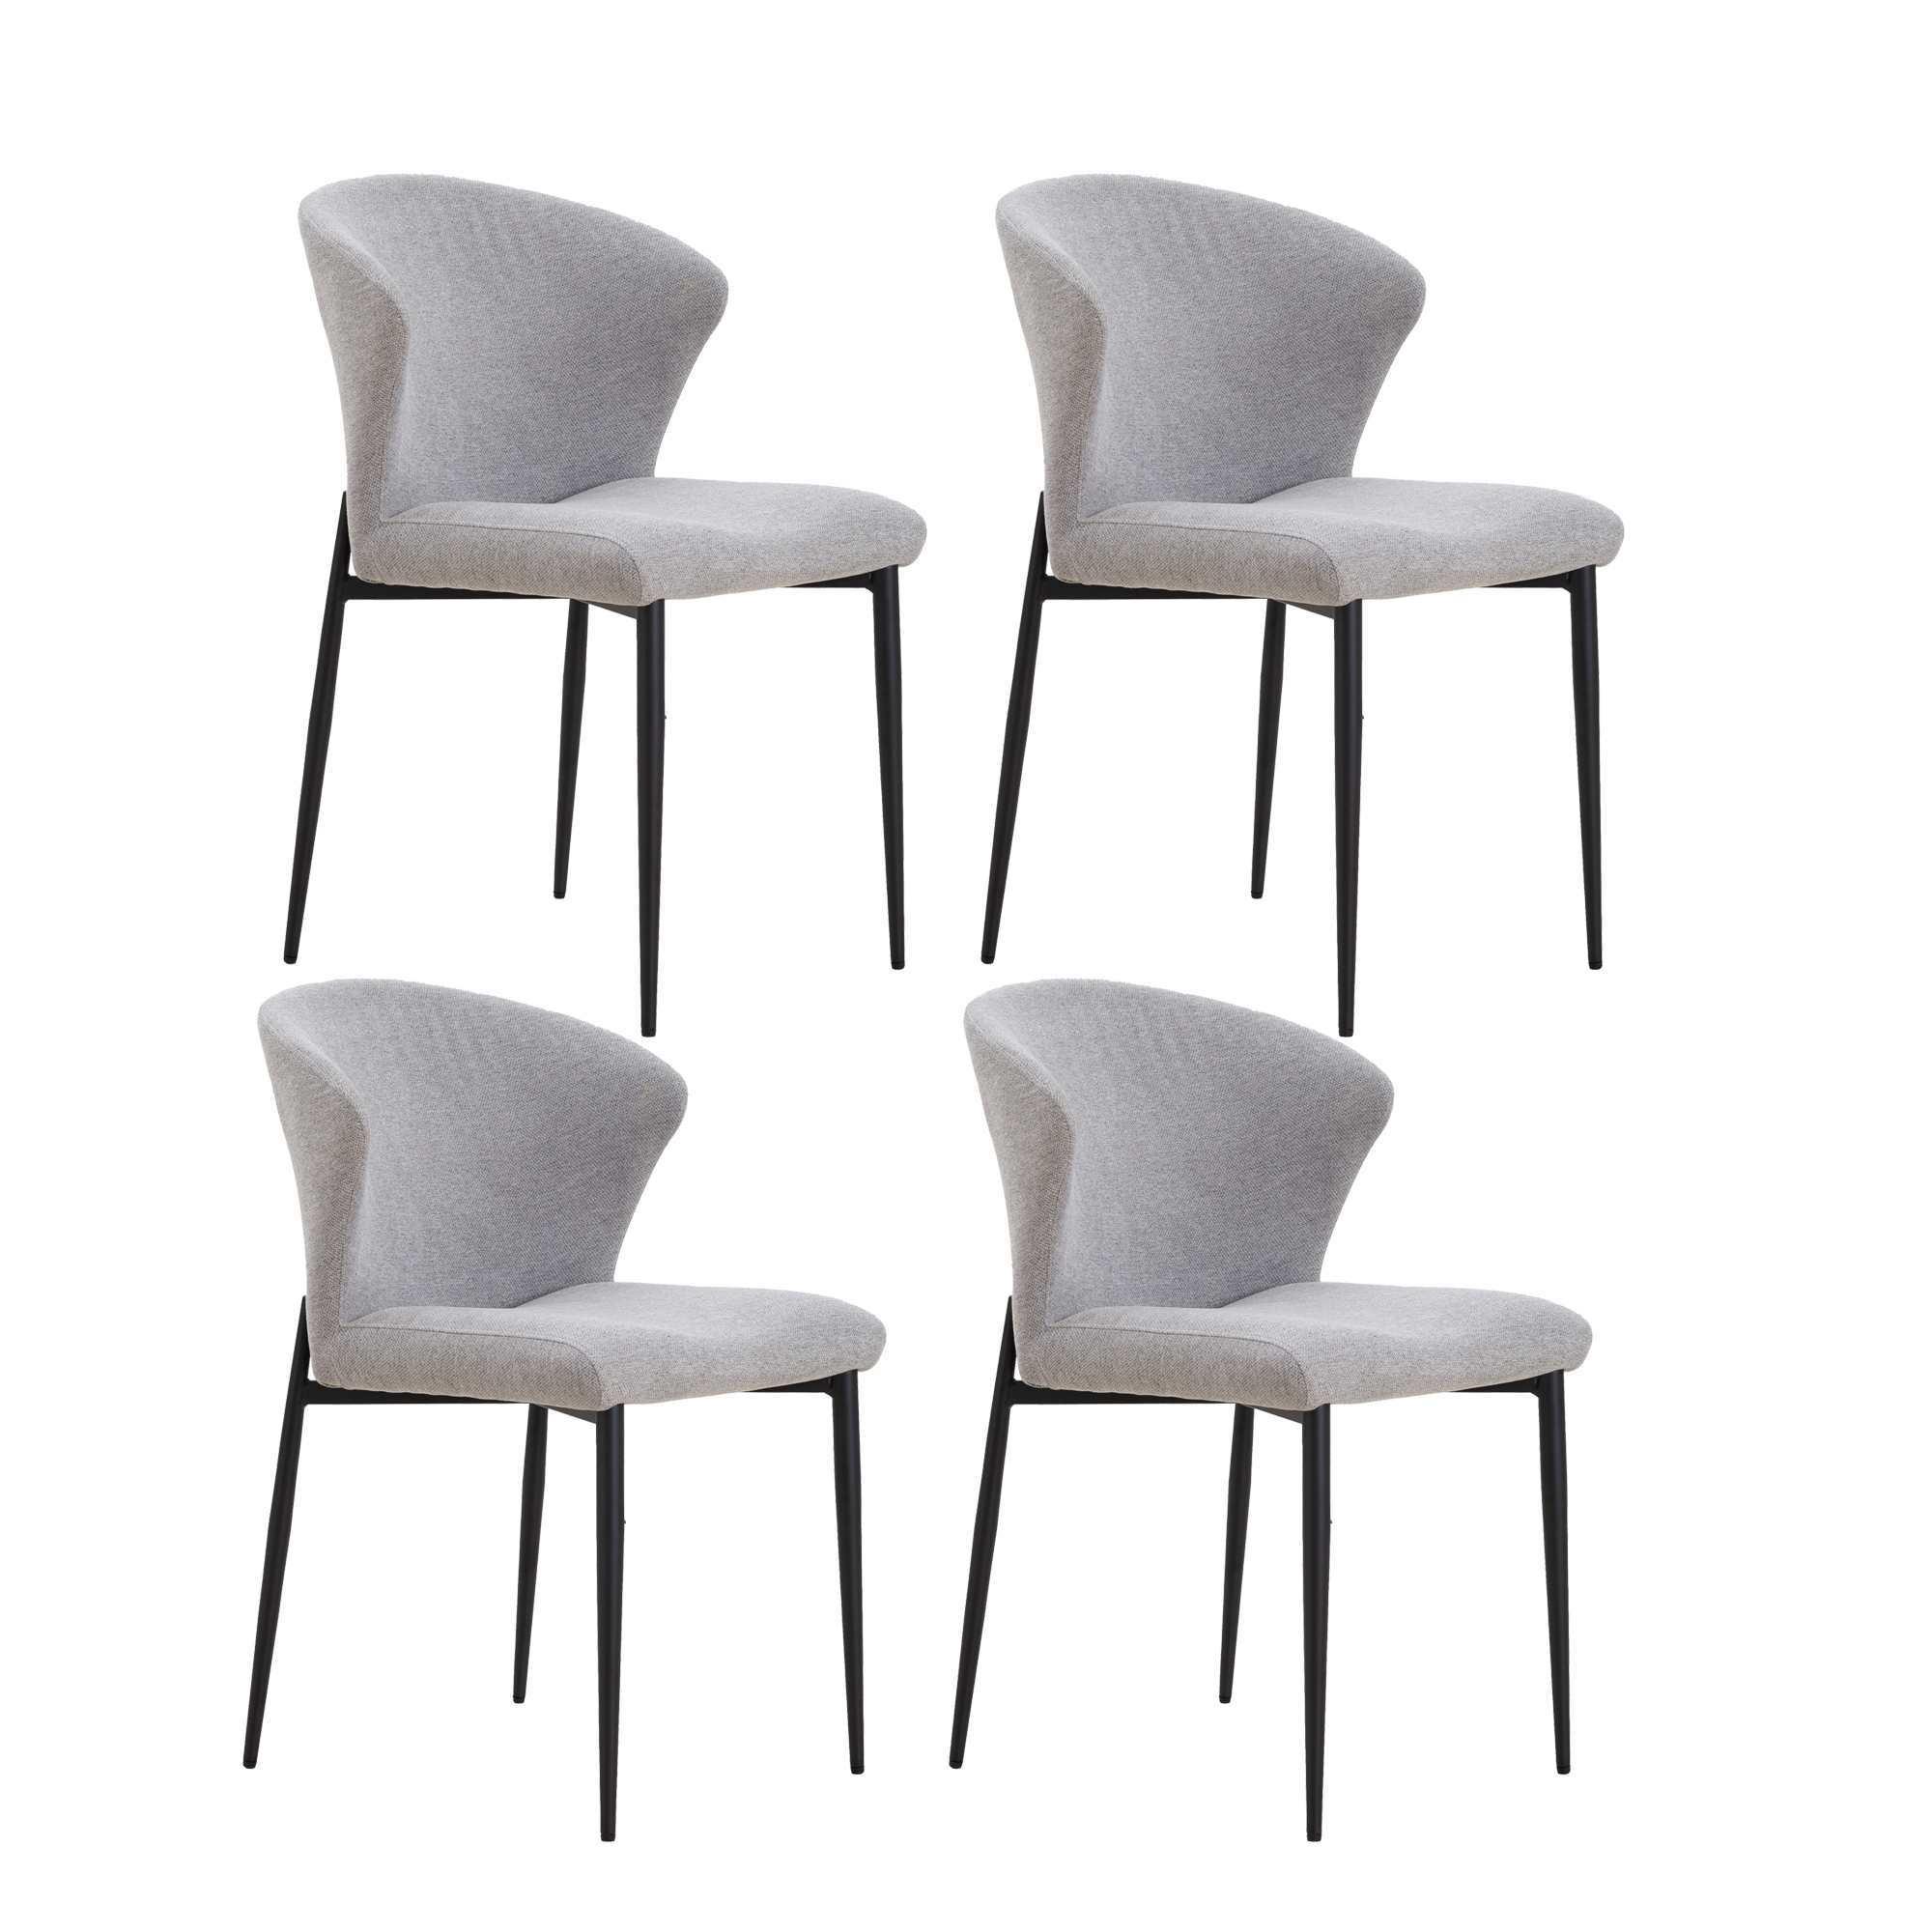 Dining Chairs set of 4, Upholstered Side Chairs, Adjustable Kitchen Chairs Accent Chair Cushion Upholstered Seat with Metal Legs for Living Room Grey